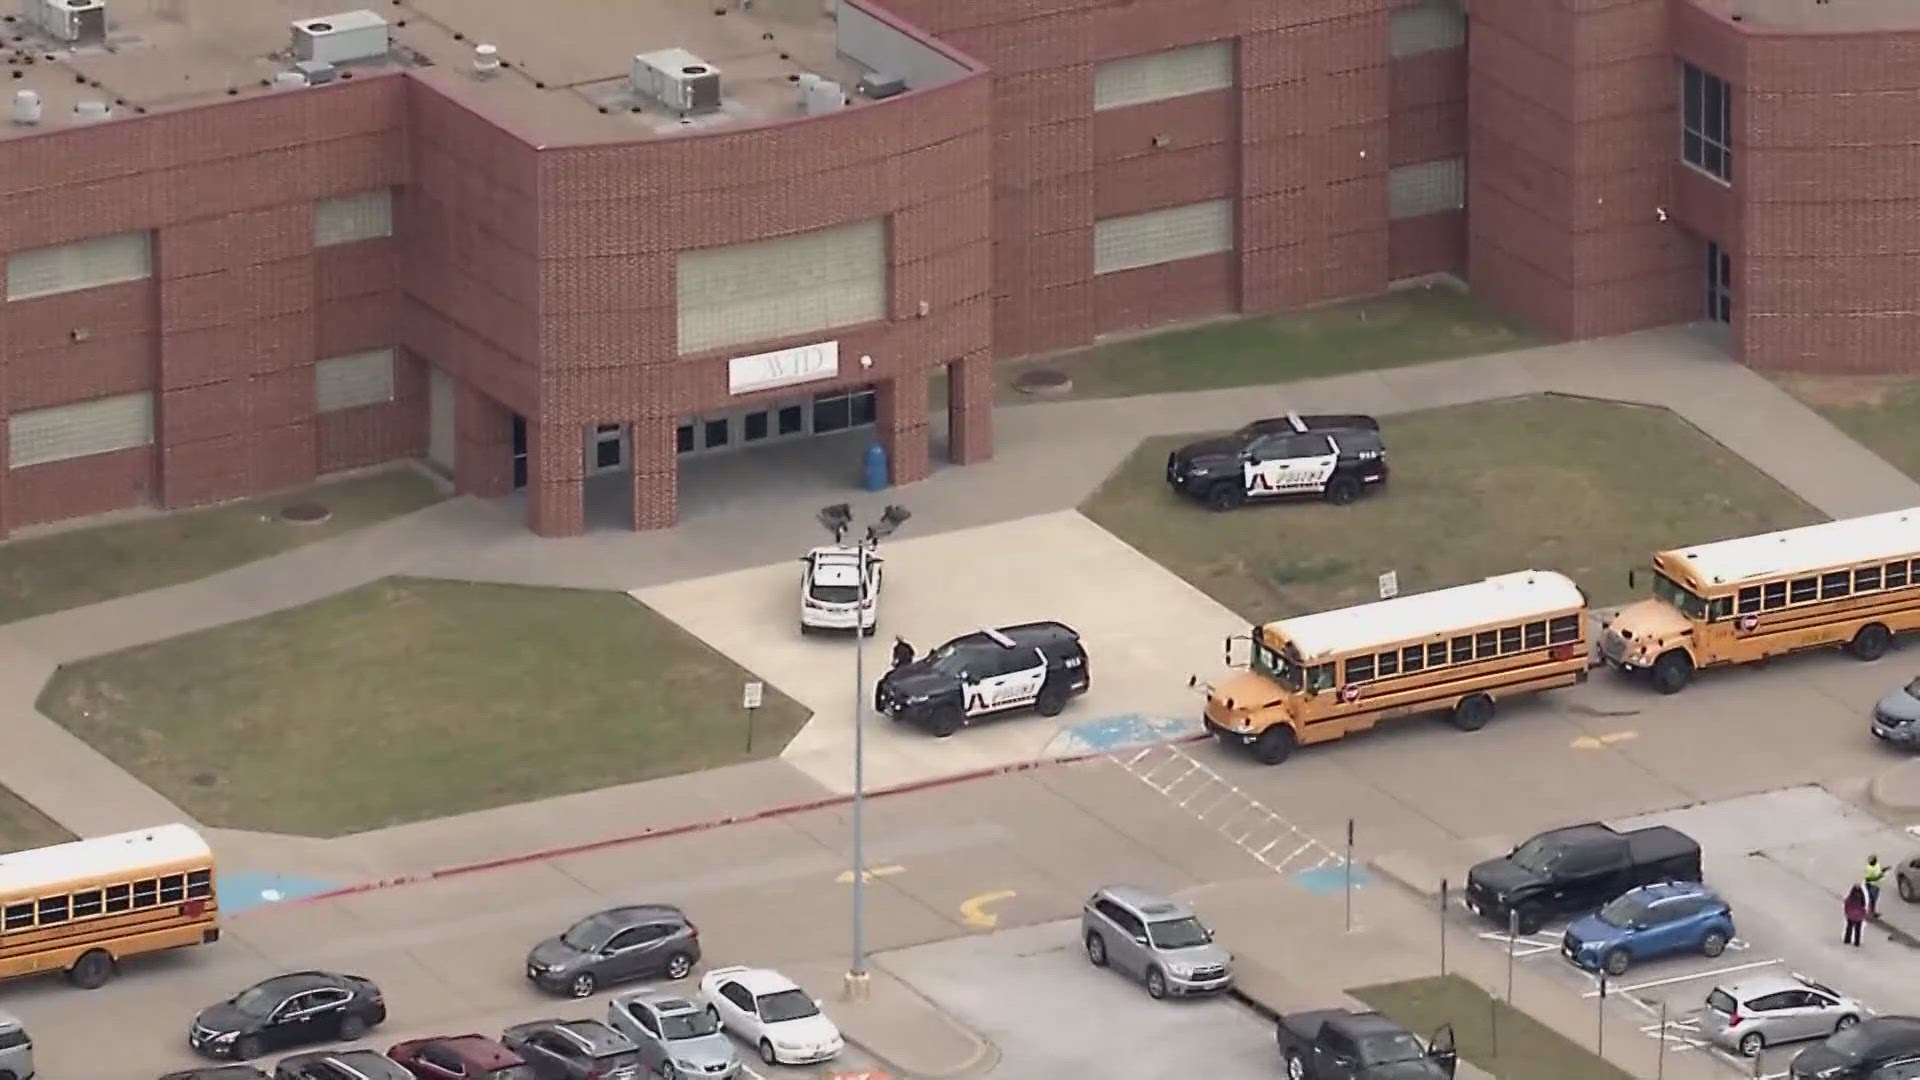 An 18-year-old male student was fatally shot outside Bowie High School in Arlington Wednesday, officials said.